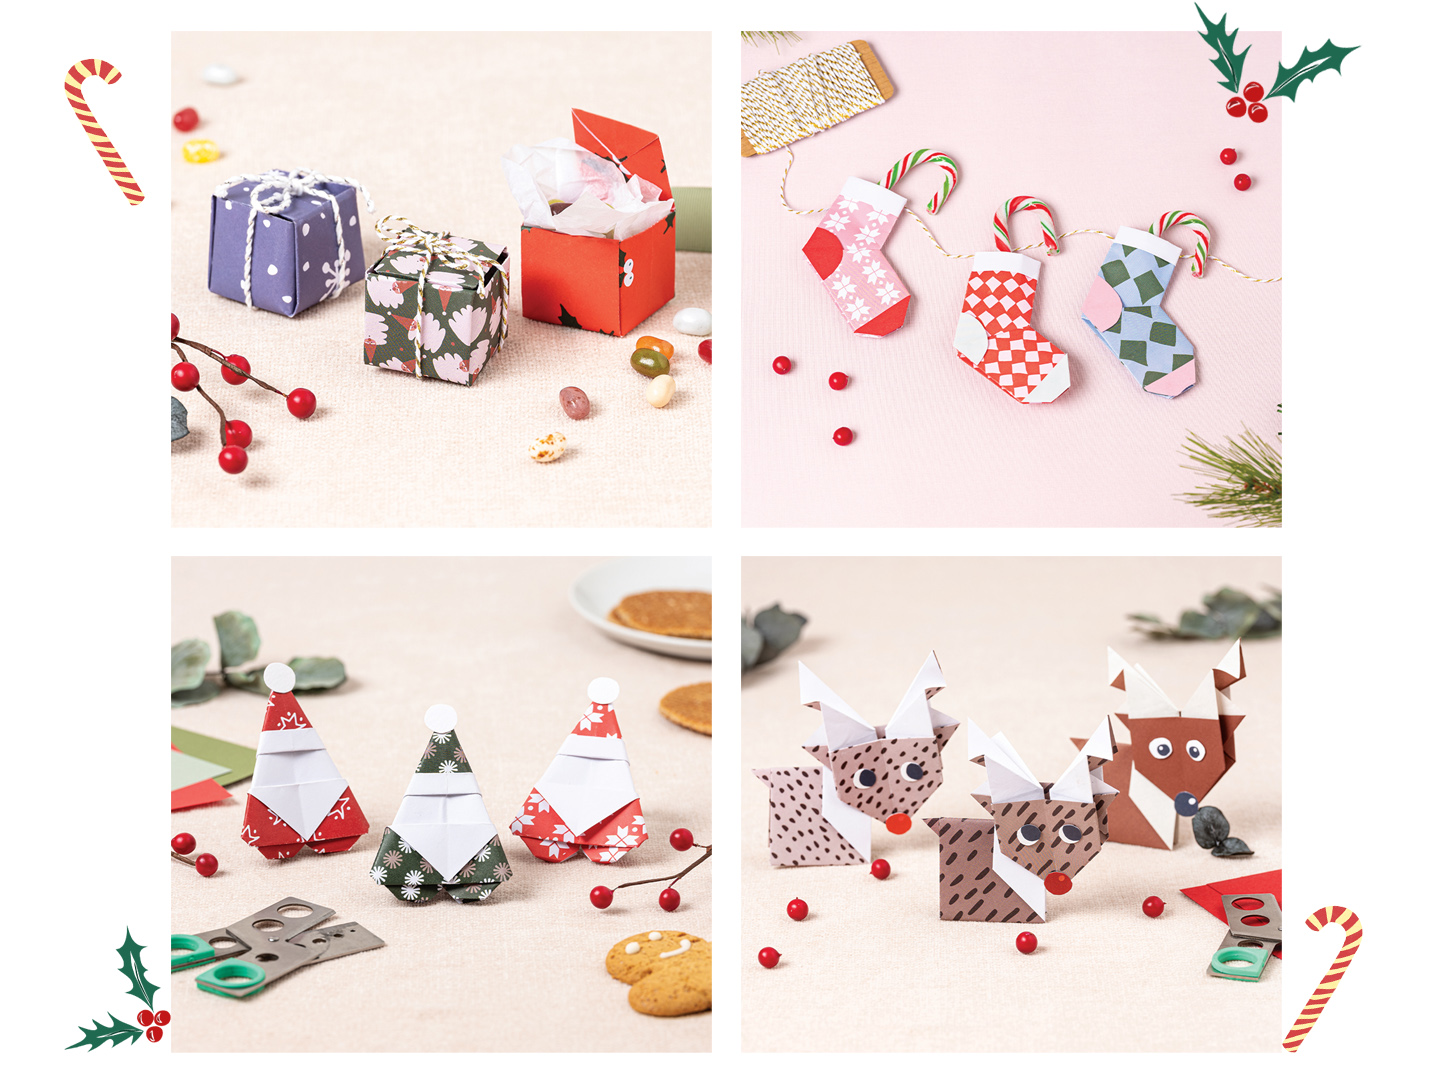 Presents, stockings, Santas and reindeer origami characters with candy cane and holly decorations